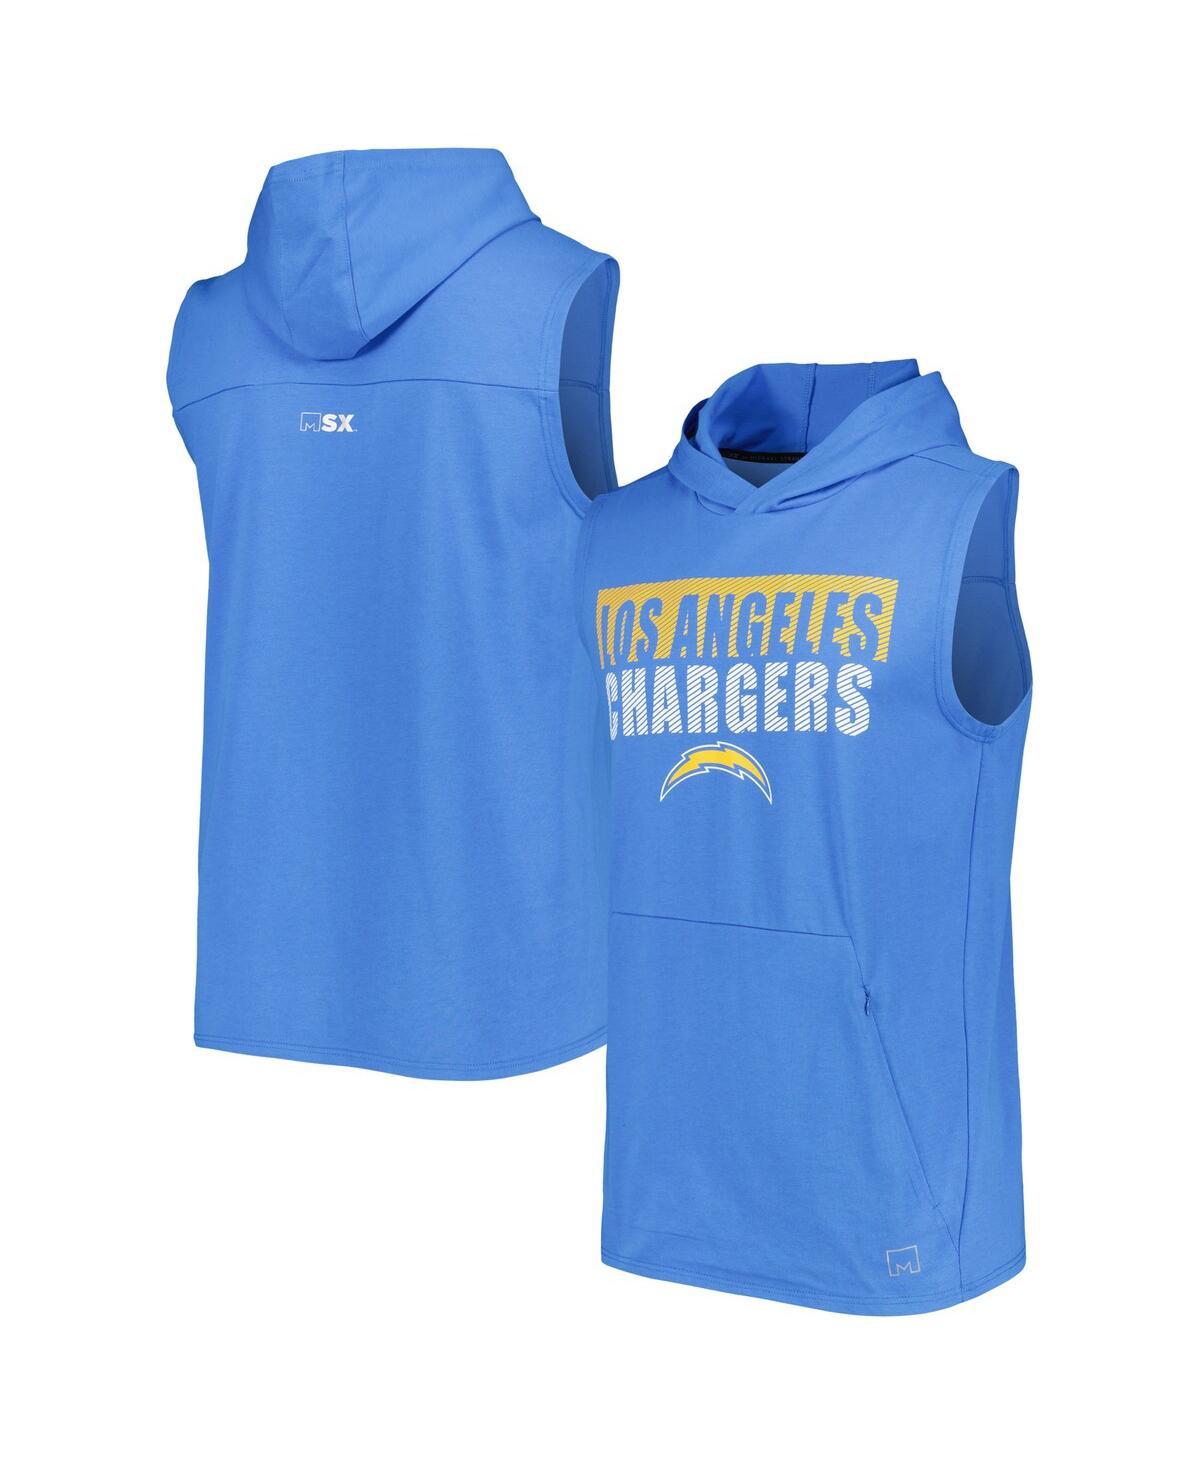 Men's Msx by Michael Strahan Powder Blue Los Angeles Chargers Relay Sleeveless Pullover Hoodie - Powder Blue